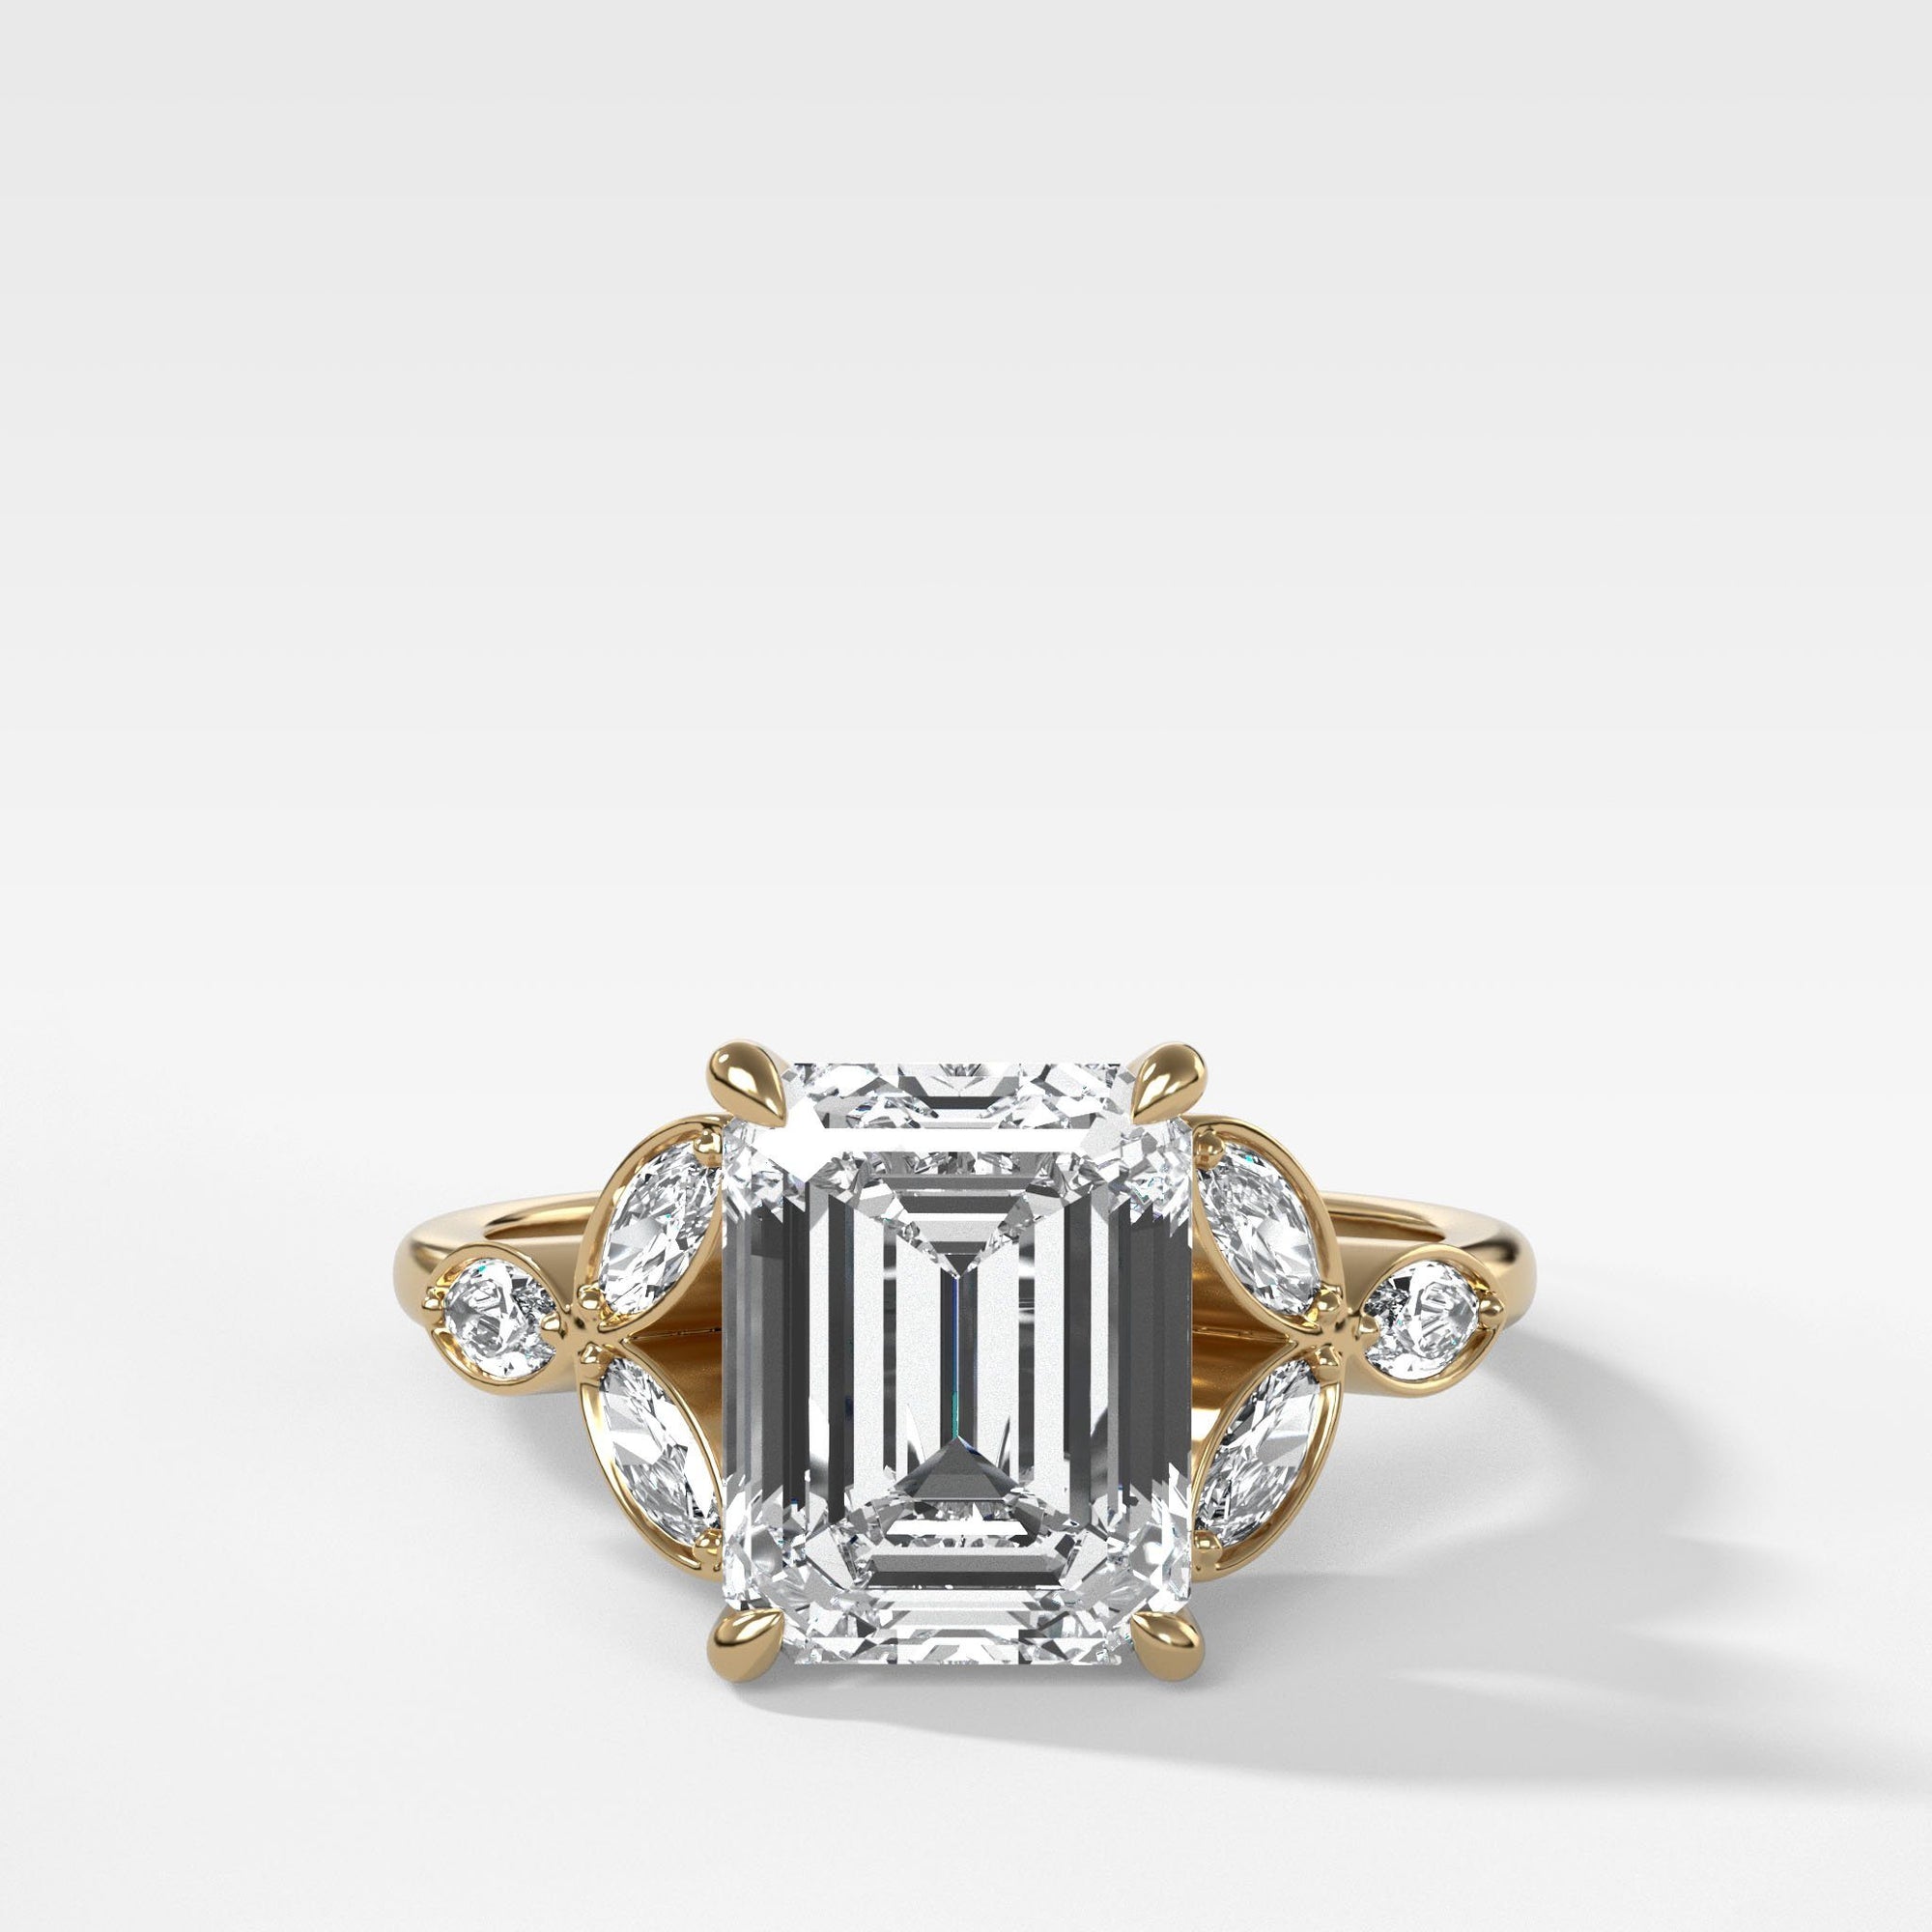 Laurel Ring With North South Emerald Cut by Good Stone in Yellow Gold